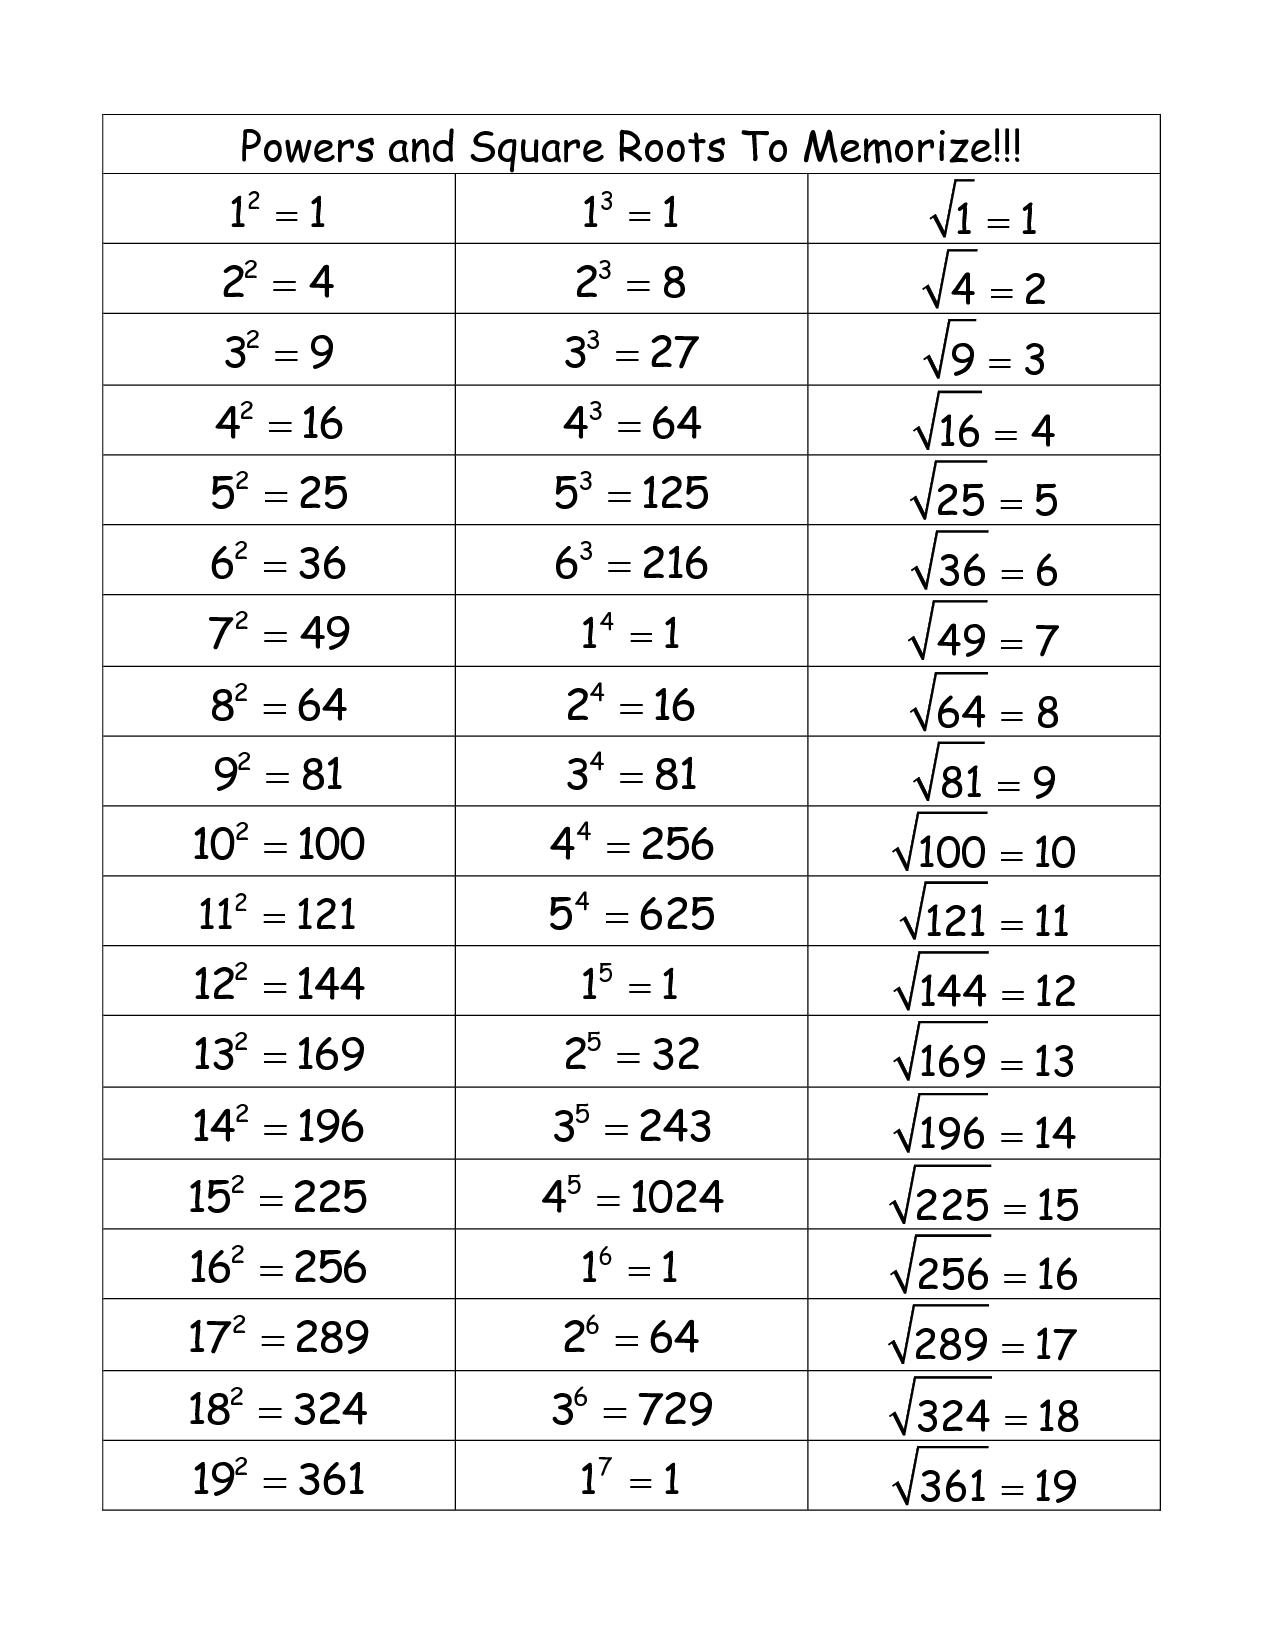 9-best-images-of-squares-and-square-roots-worksheets-perfect-square-roots-list-squares-and